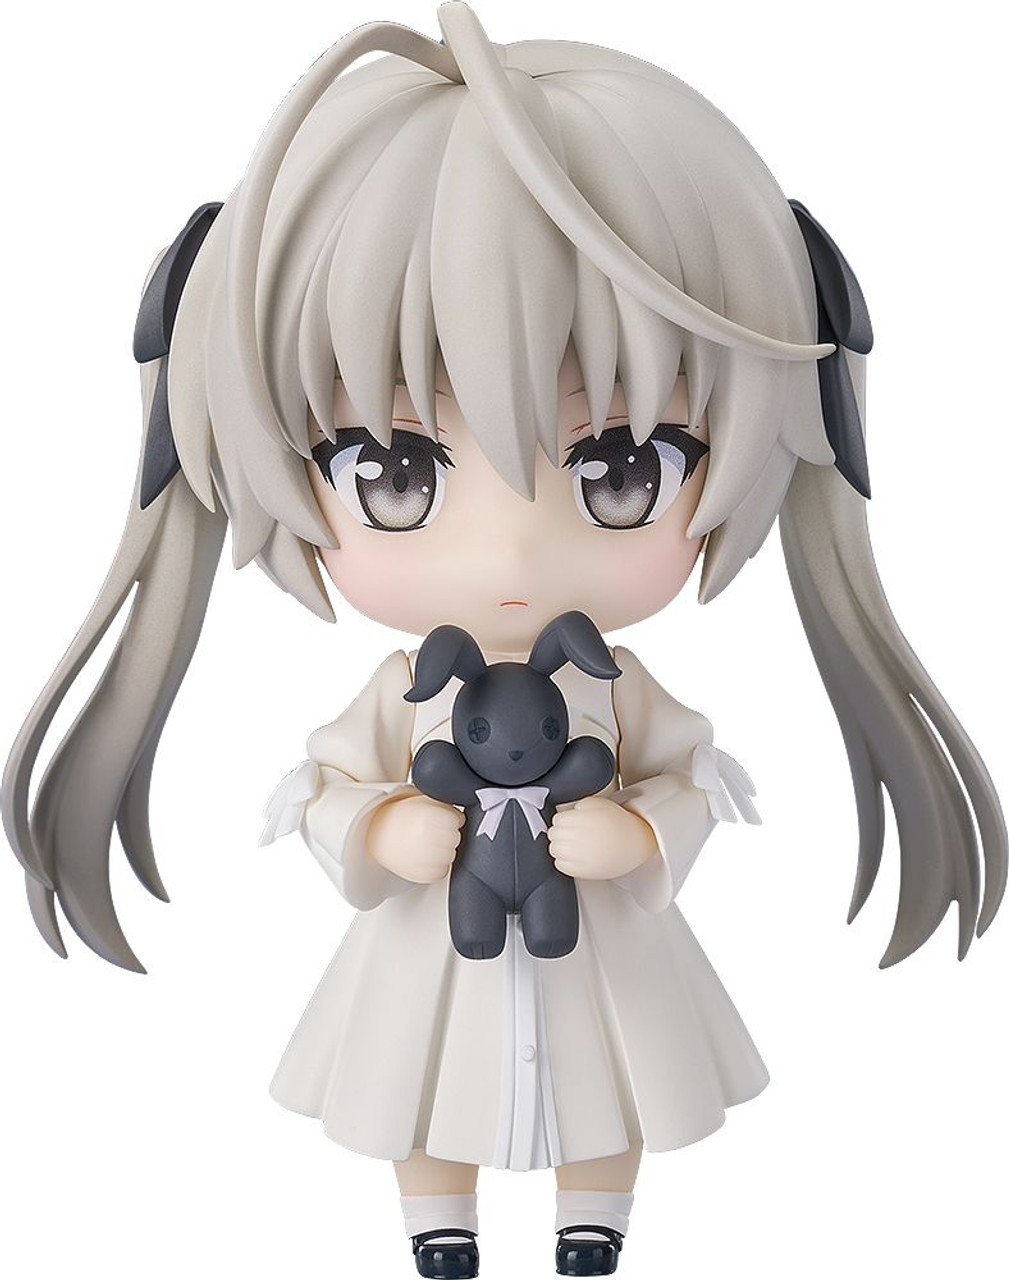 Yosuga no Sora complete collection / NEW anime on DVD from Anime Works